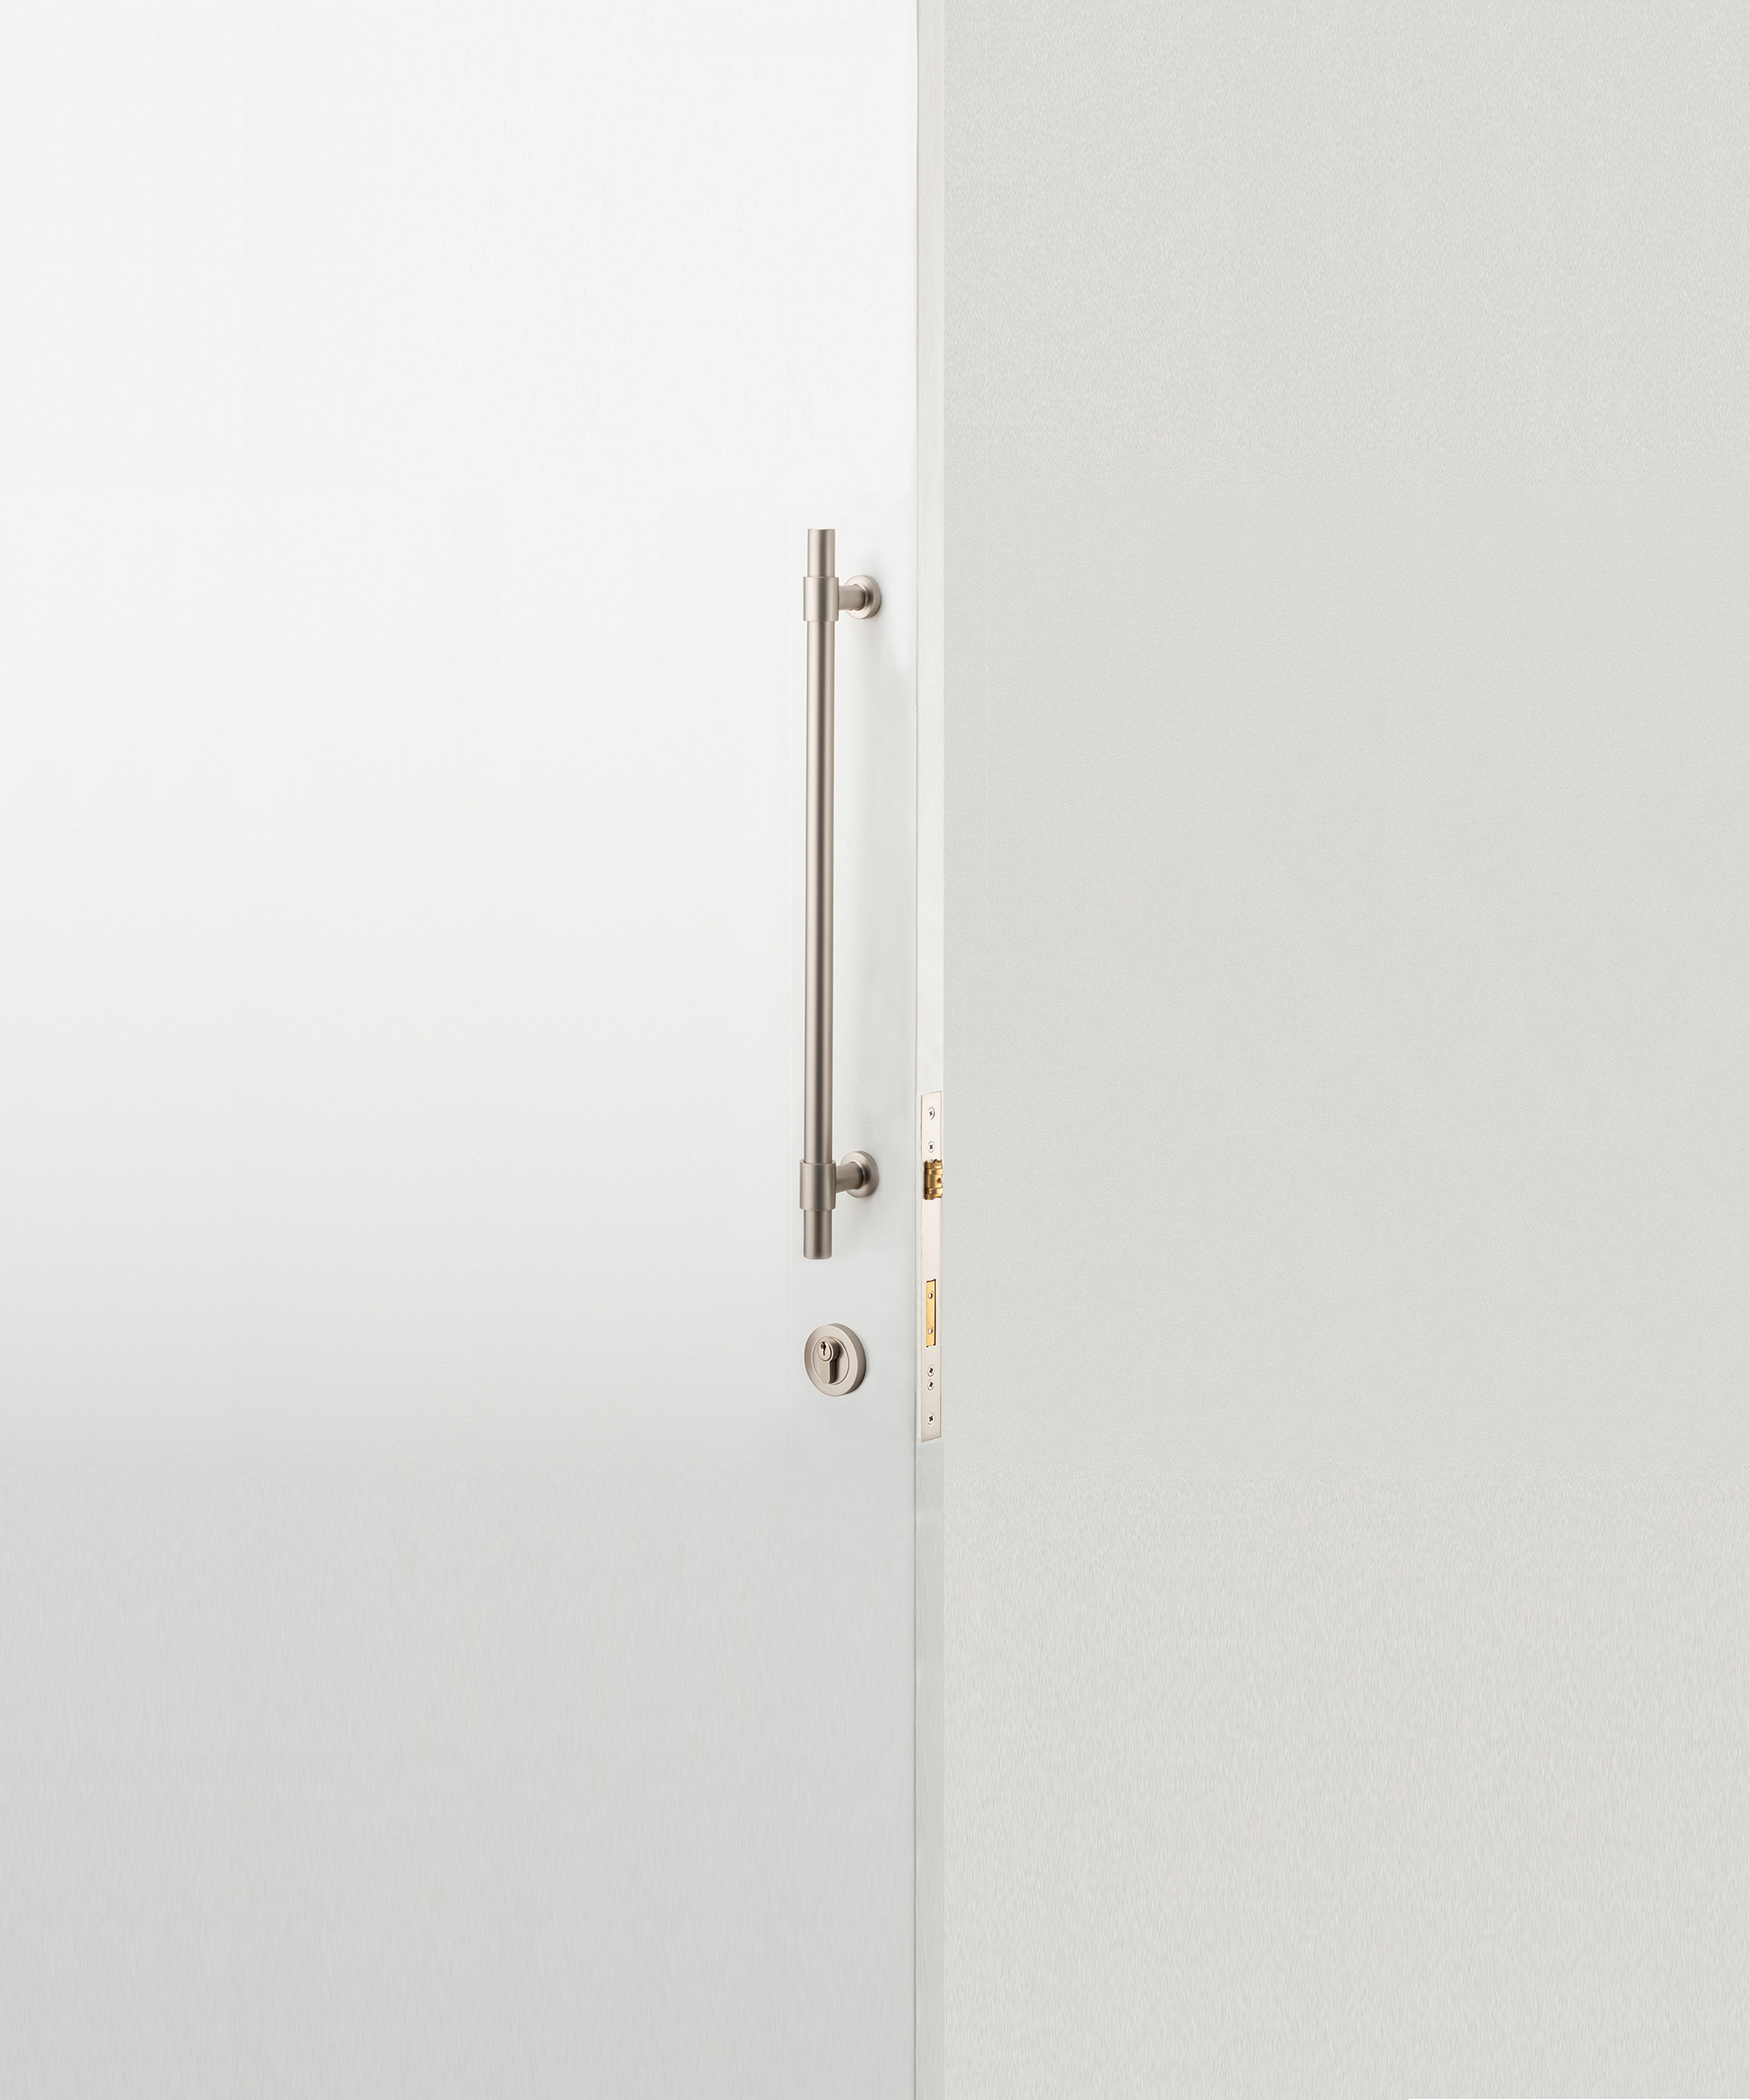 0484KENTR60KK - Berlin Pull Handle - 600mm Entrance Kit with Separate High Security Lock - Polished Chrome - Entrance